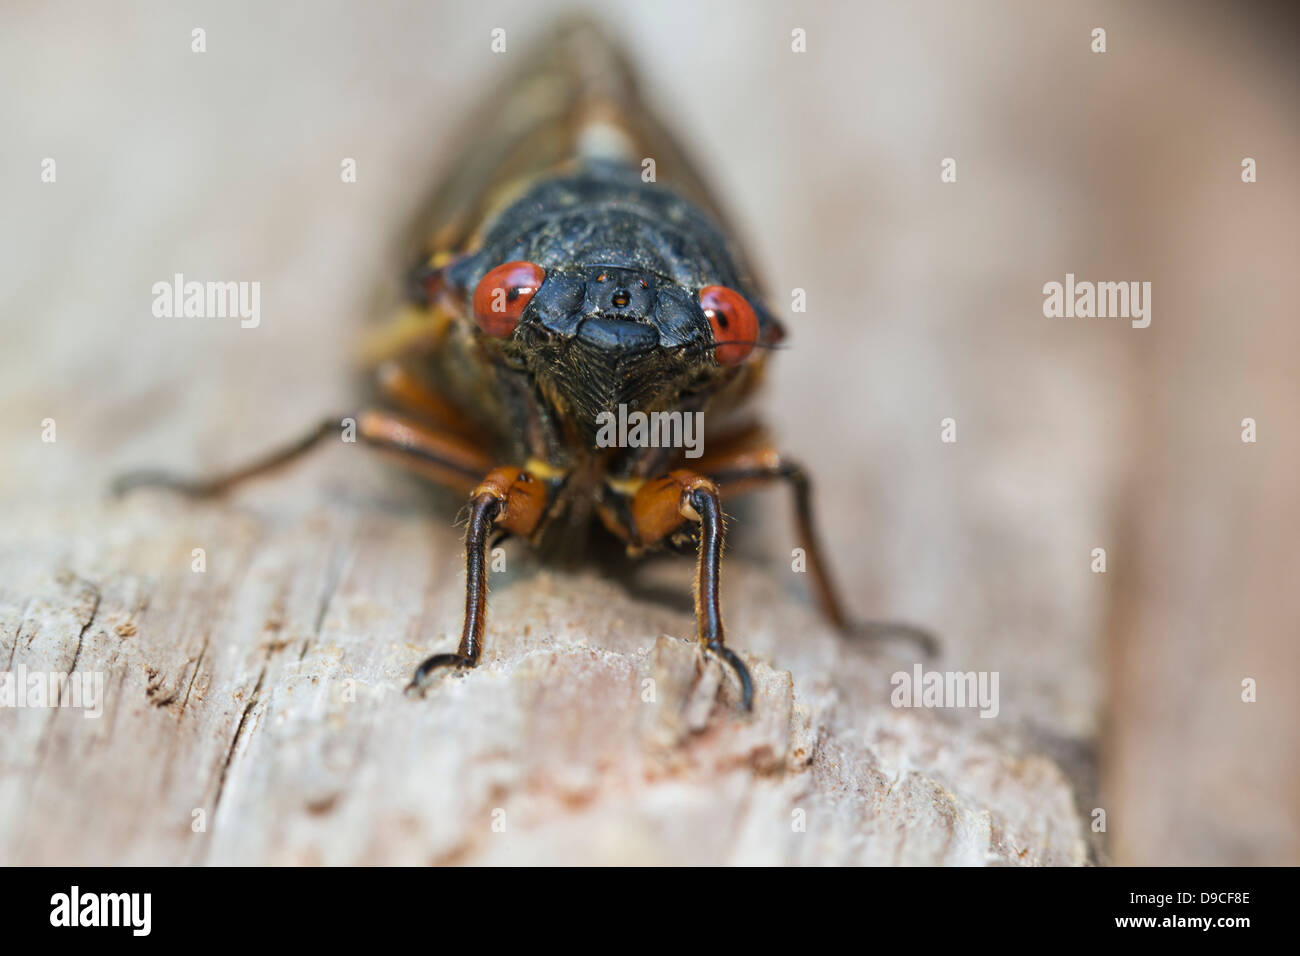 Close-up of Periodical Cicada (Magicicada sp.) also know as the 17-year Periodical Cicadas of eastern North America. Stock Photo